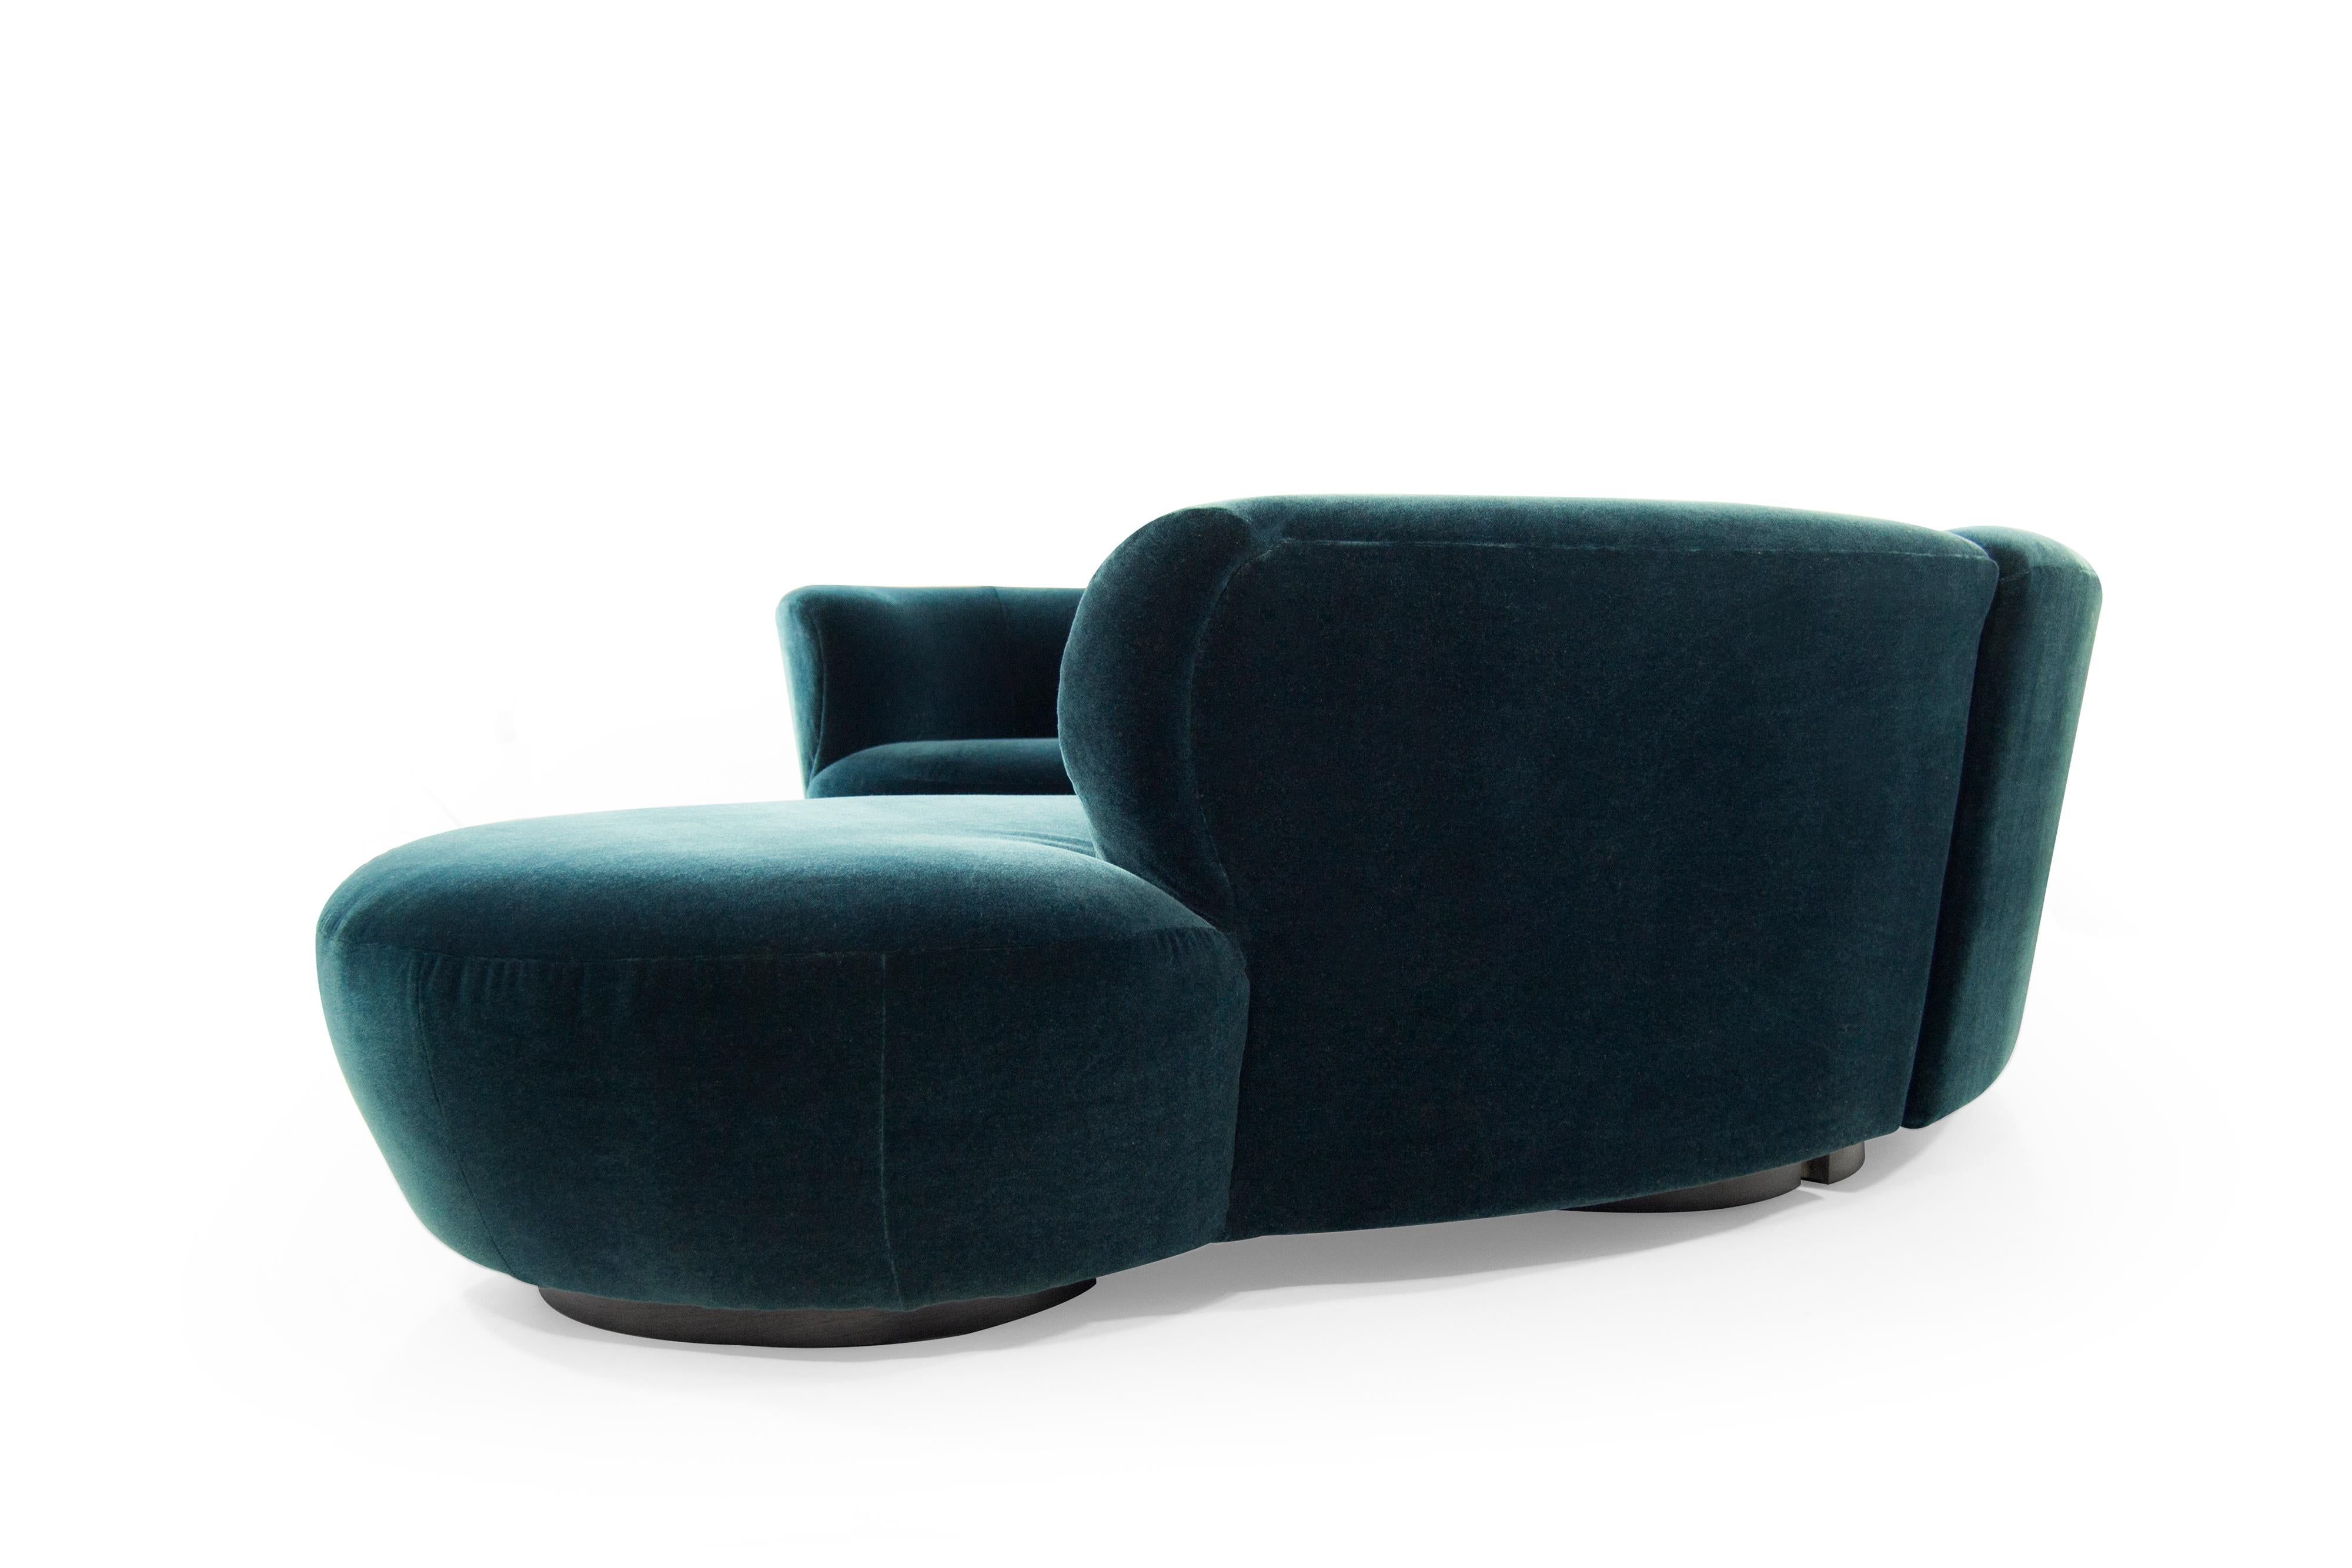 20th Century Vladimir Kagan for Directional Sectional in Teal Mohair, circa 1970s